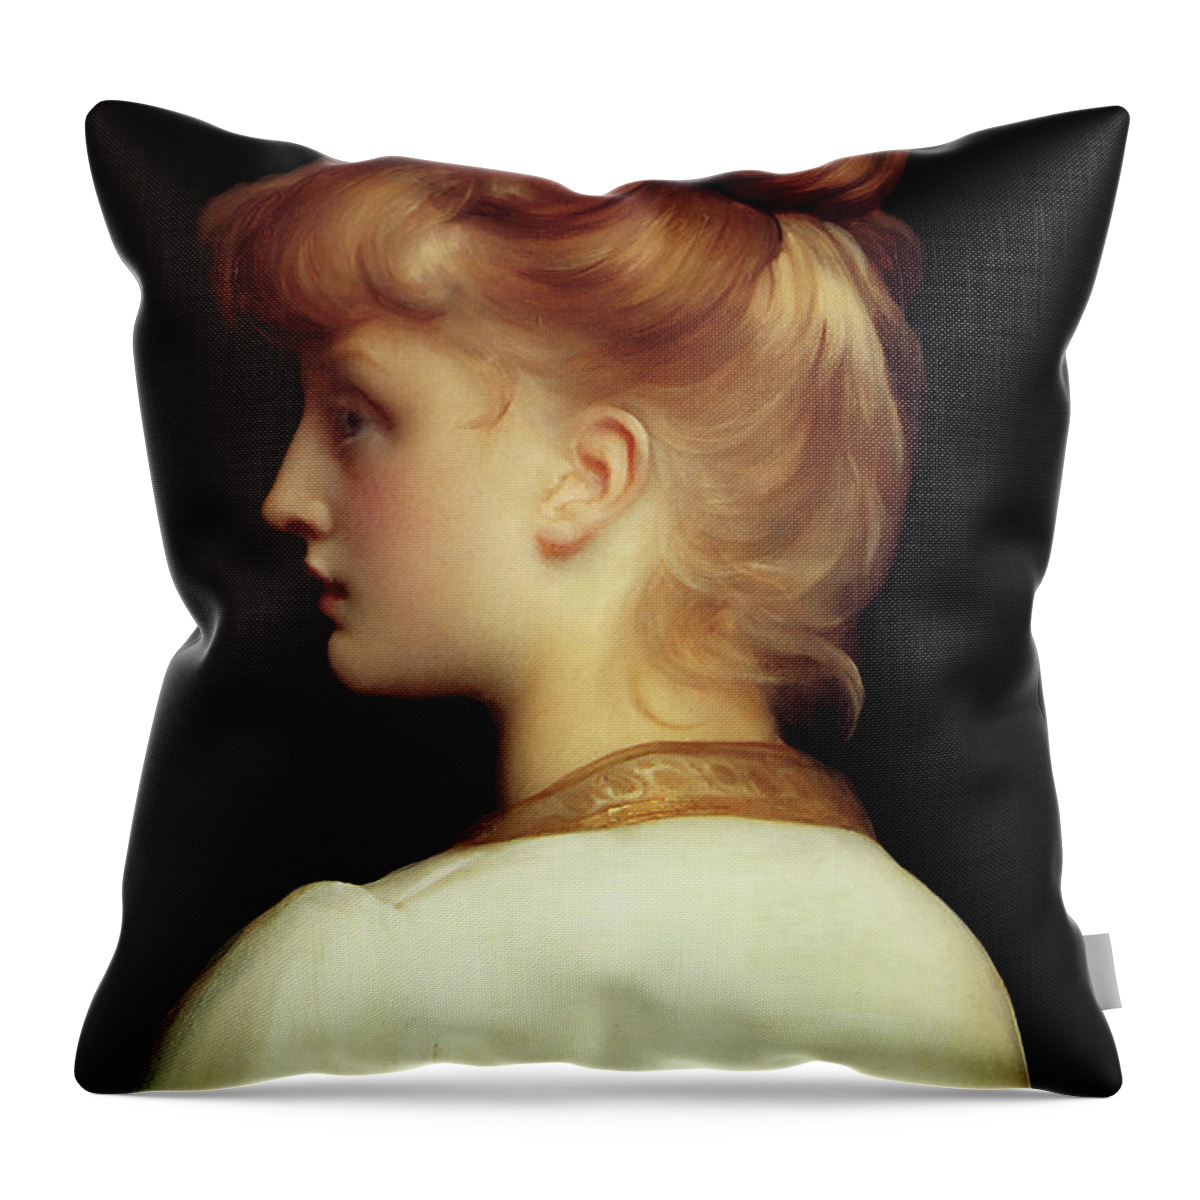 A Girl Throw Pillow featuring the painting A Girl by Lord Frederic Leighton	 by Rolando Burbon